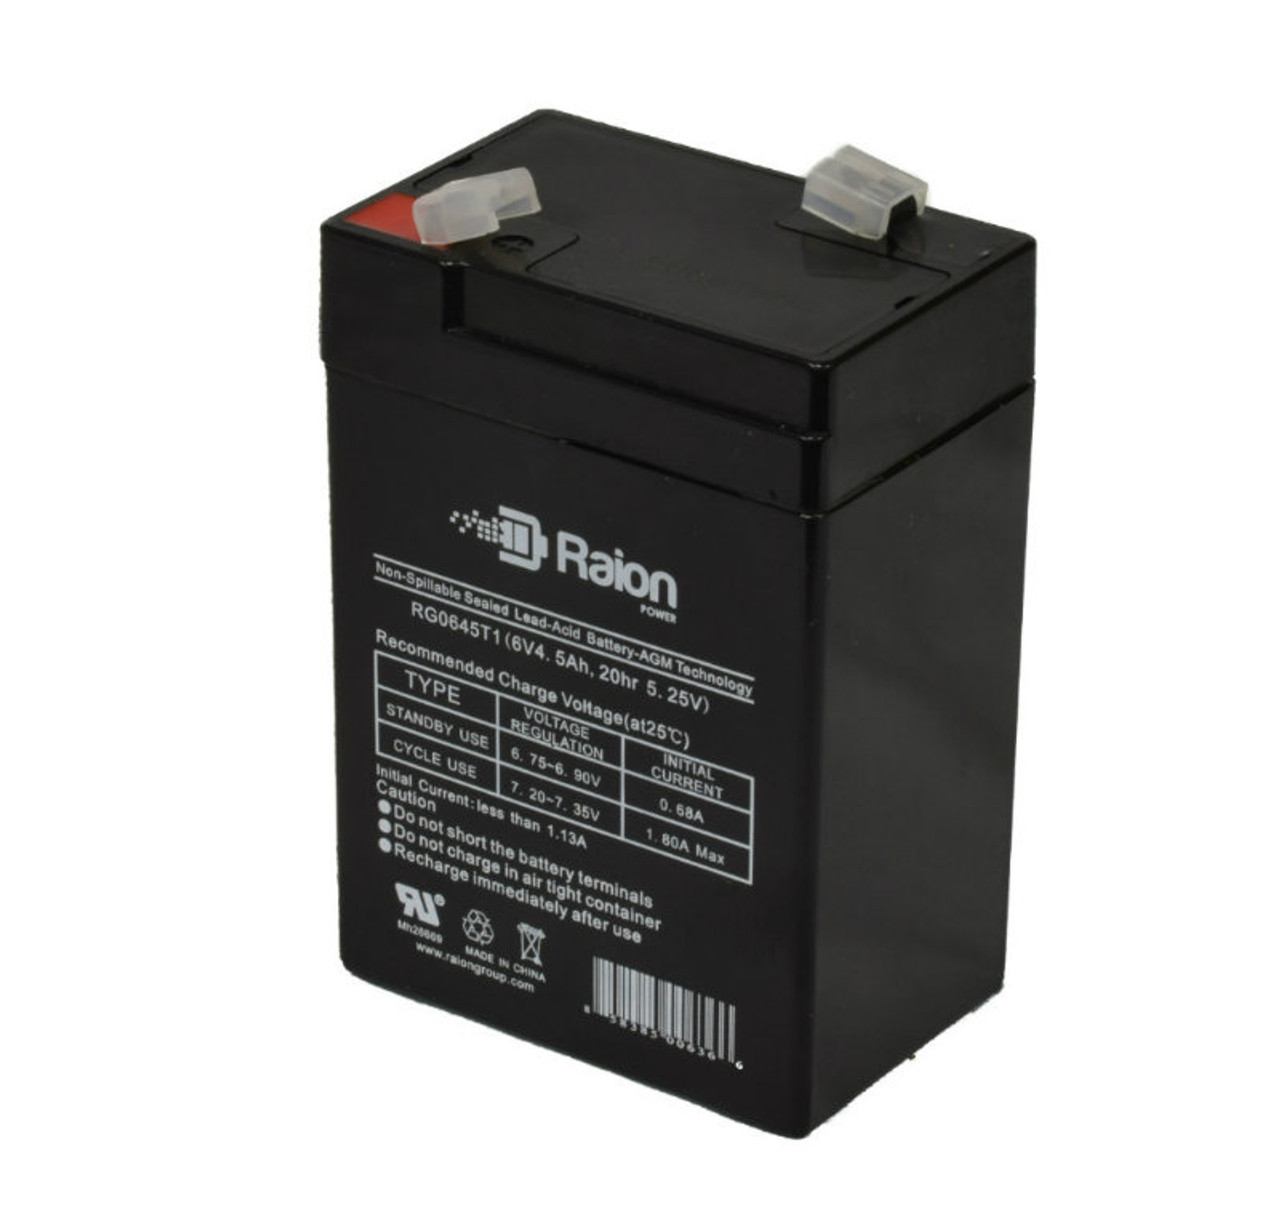 Raion Power RG0645T1 6V 4.5Ah Replacement Battery Cartridge for National Power LS016M4